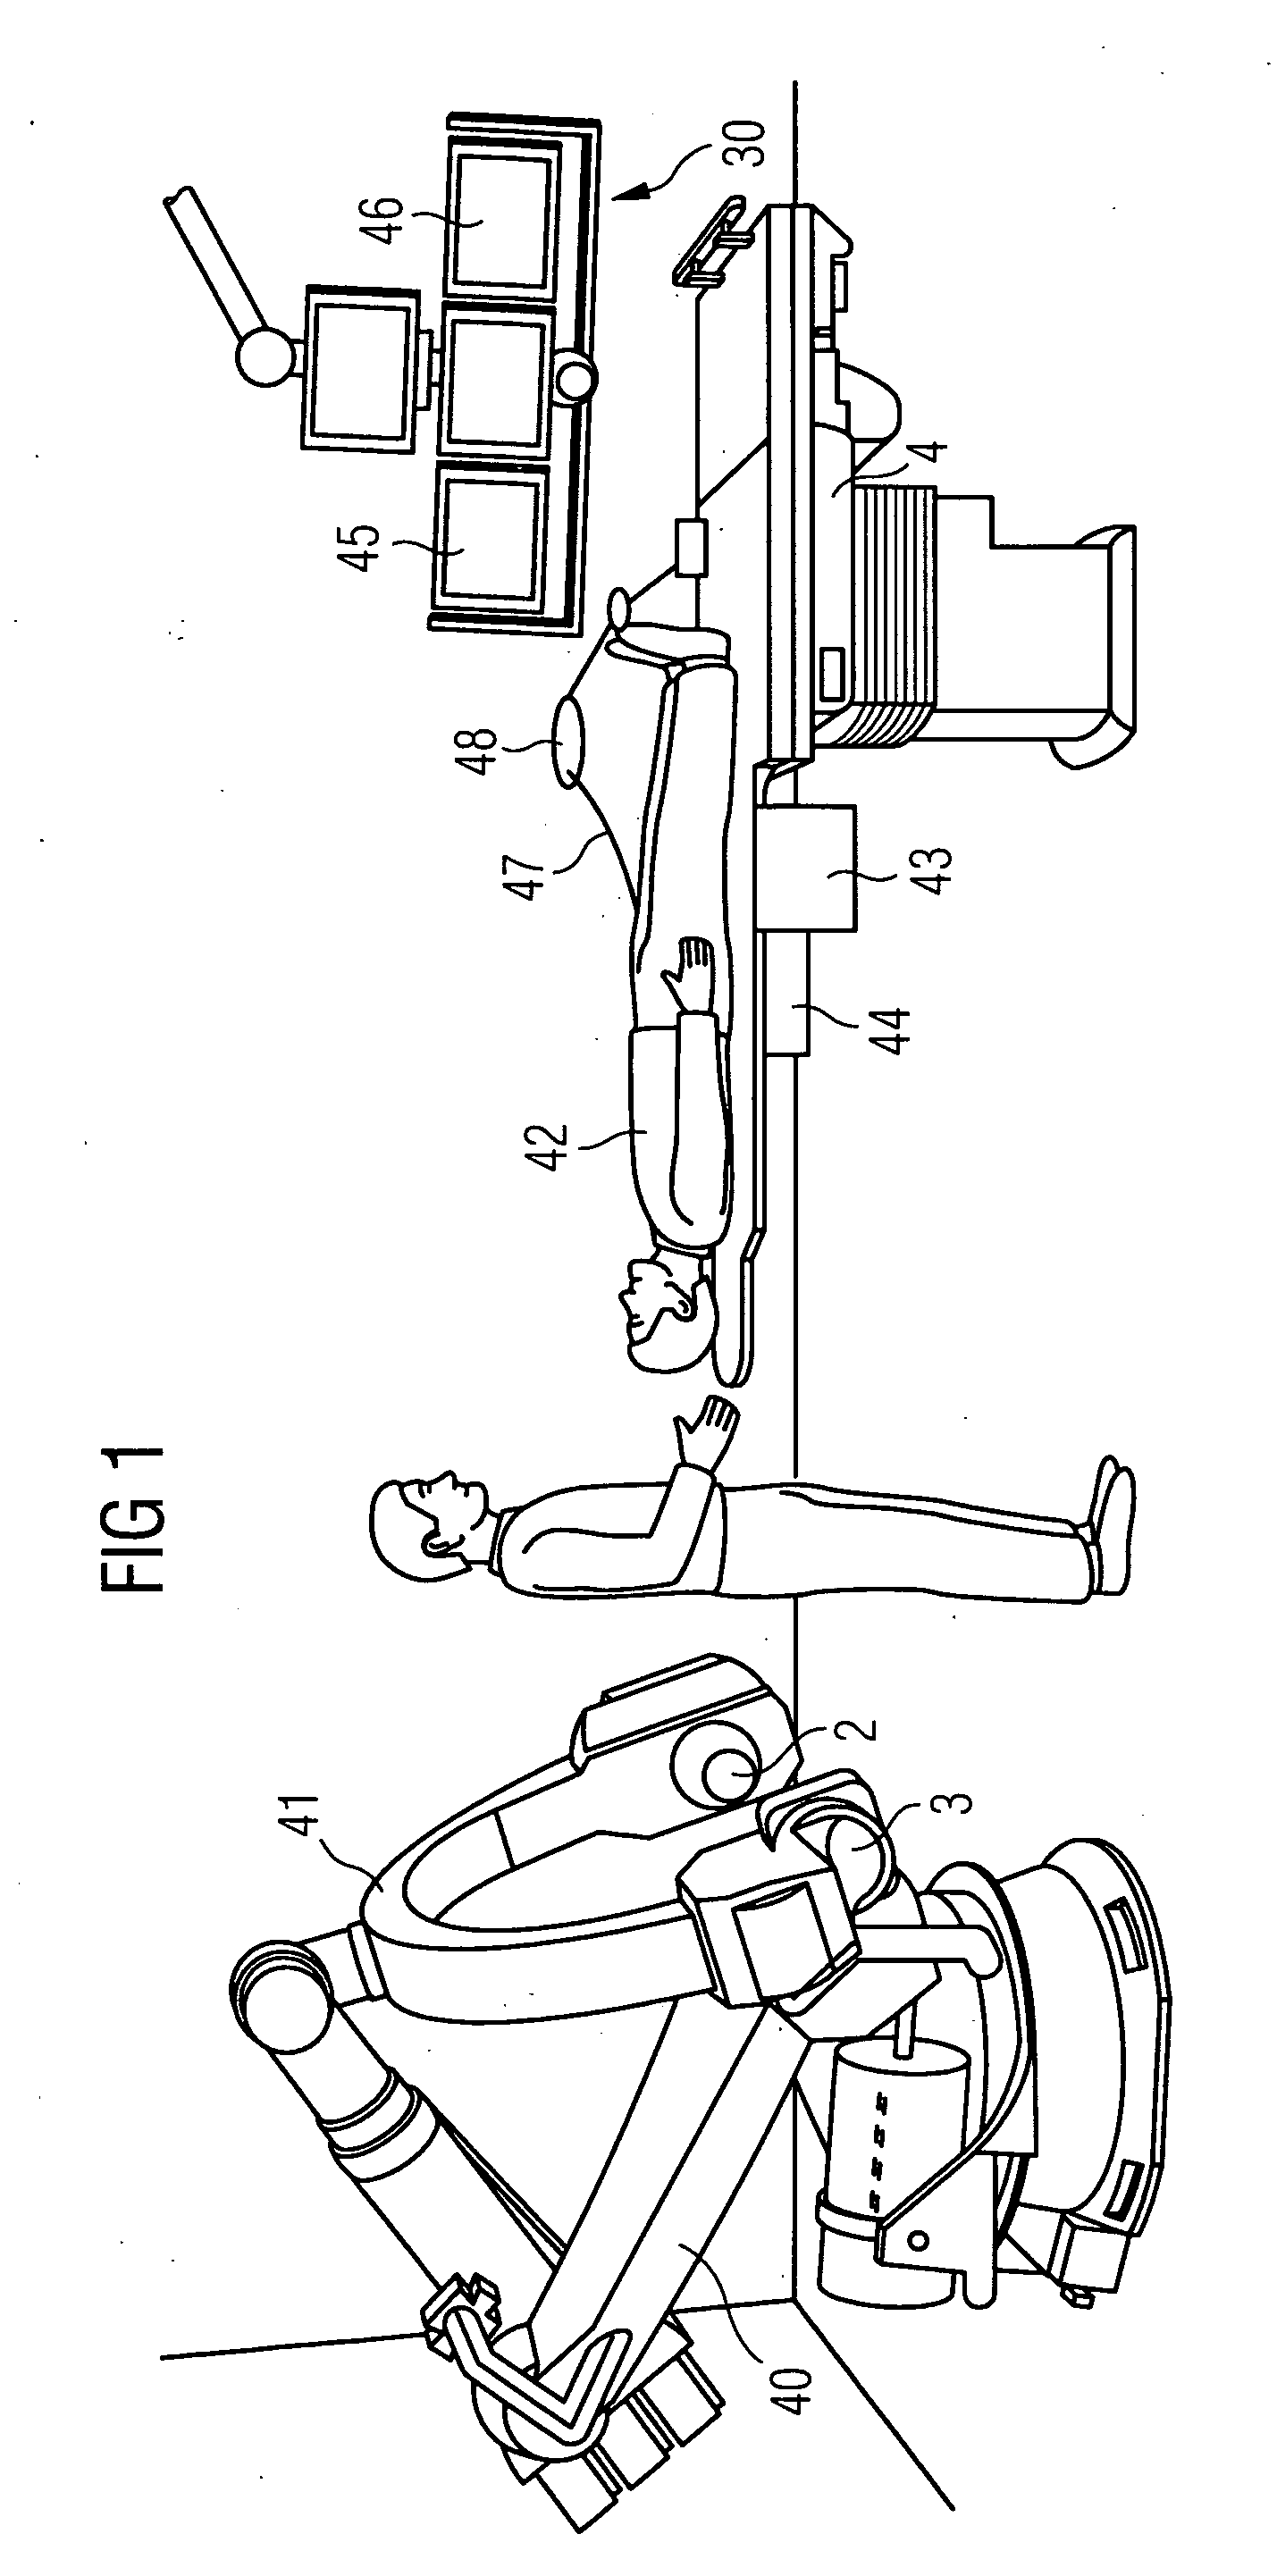 System for carrying out and monitoring minimally-invasive interventions